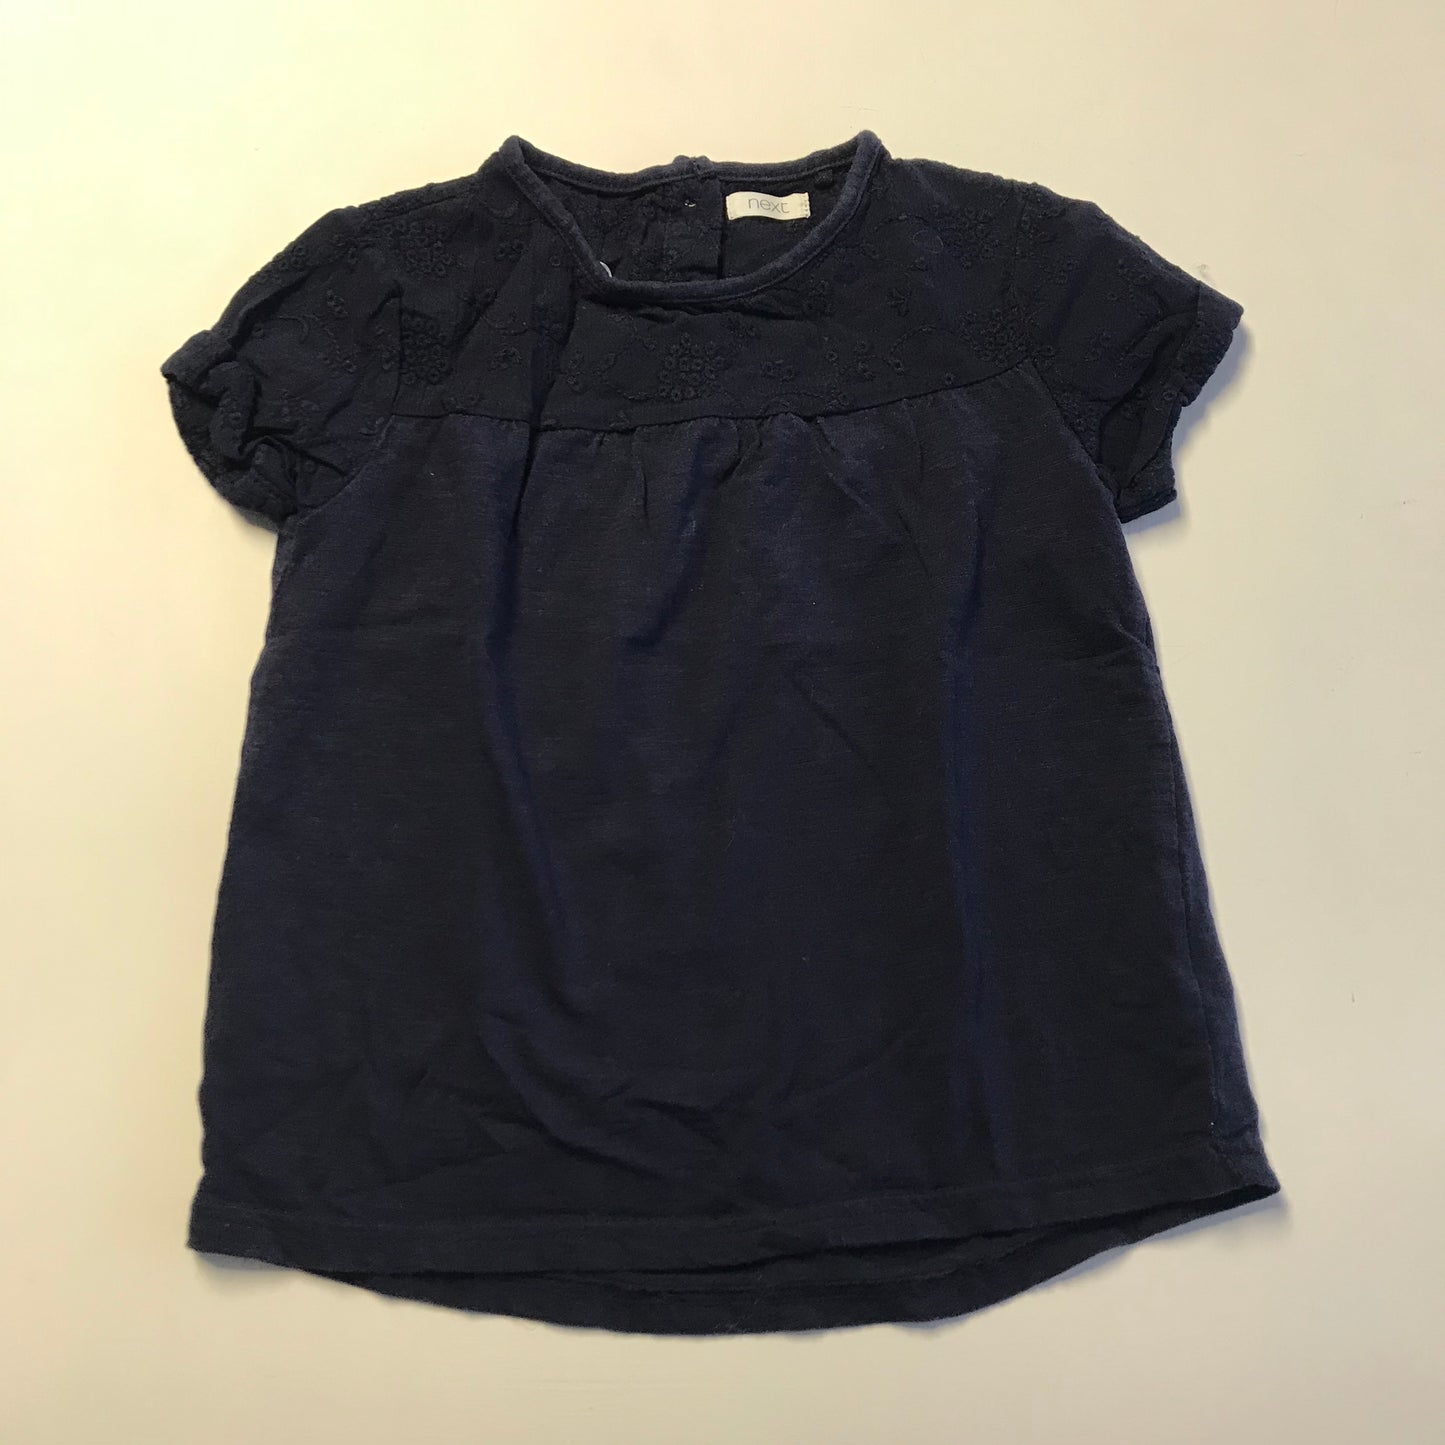 T-shirt - NEXT Navy with Embroidery - Age 6